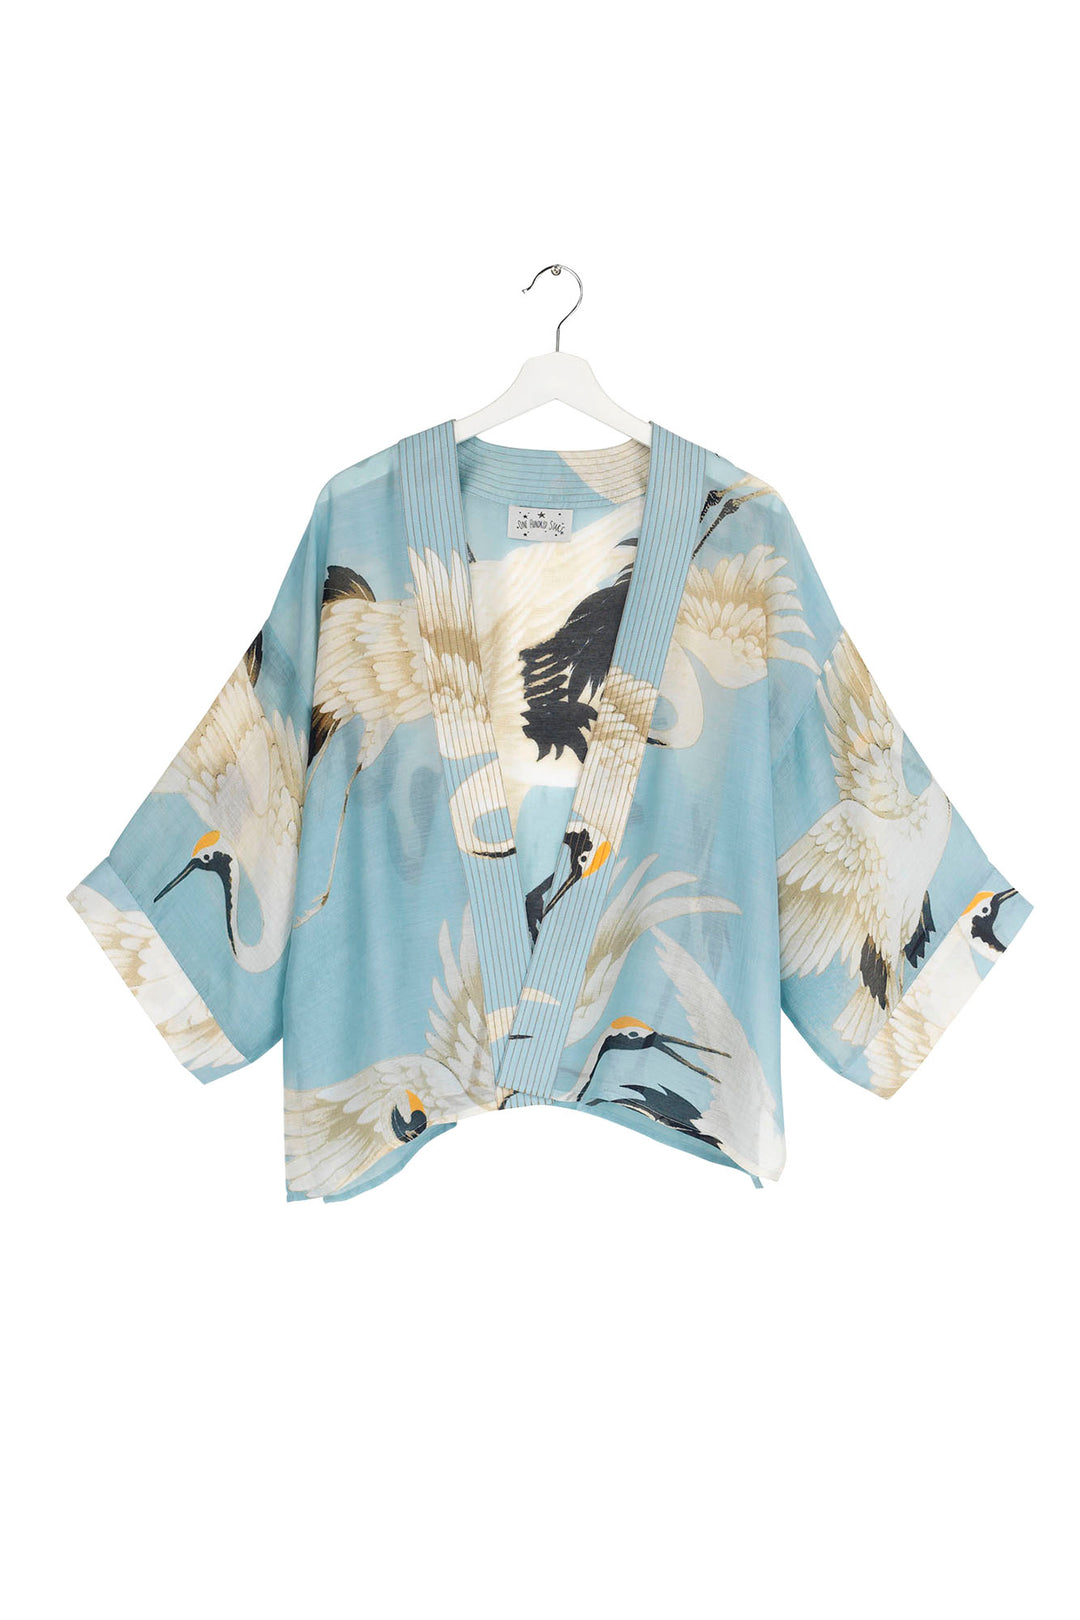 Storks and cranes have been a major art deco trend in both fashion and interiors and this Stork Sky Blue Kimono is perfect for anyone looking for something chic, stylish and in vogue!